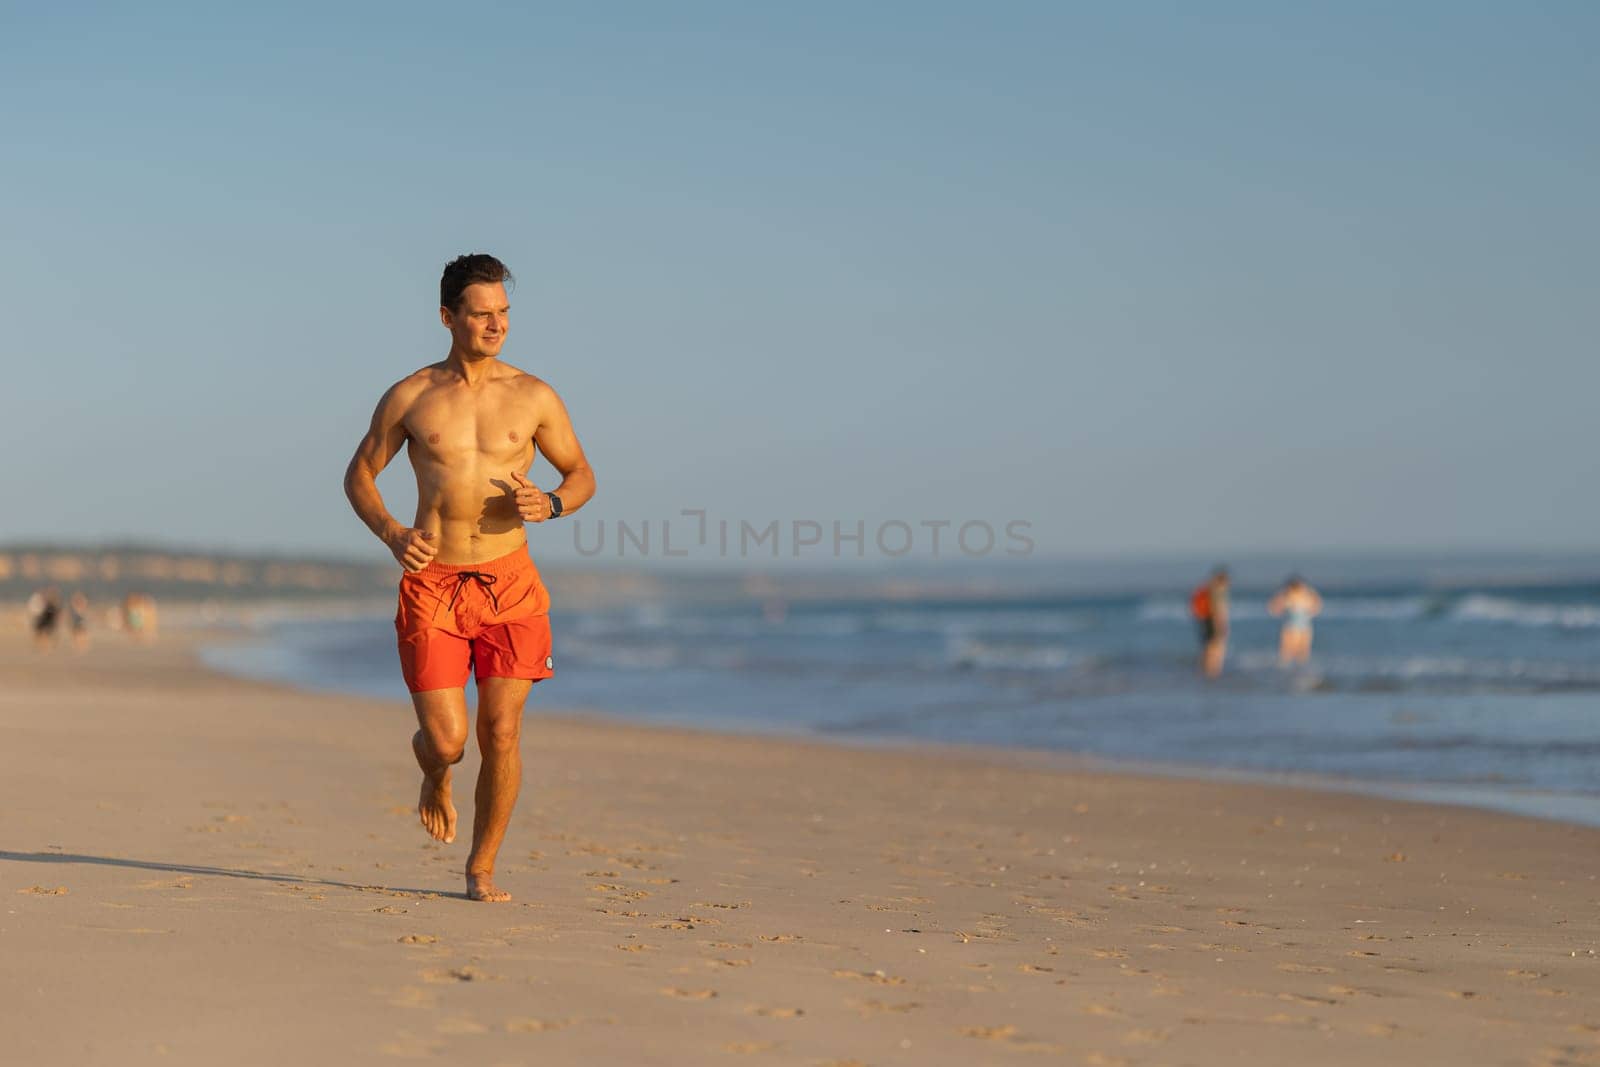 An attractive man with nice athletic body jogging on the shore. Mid shot